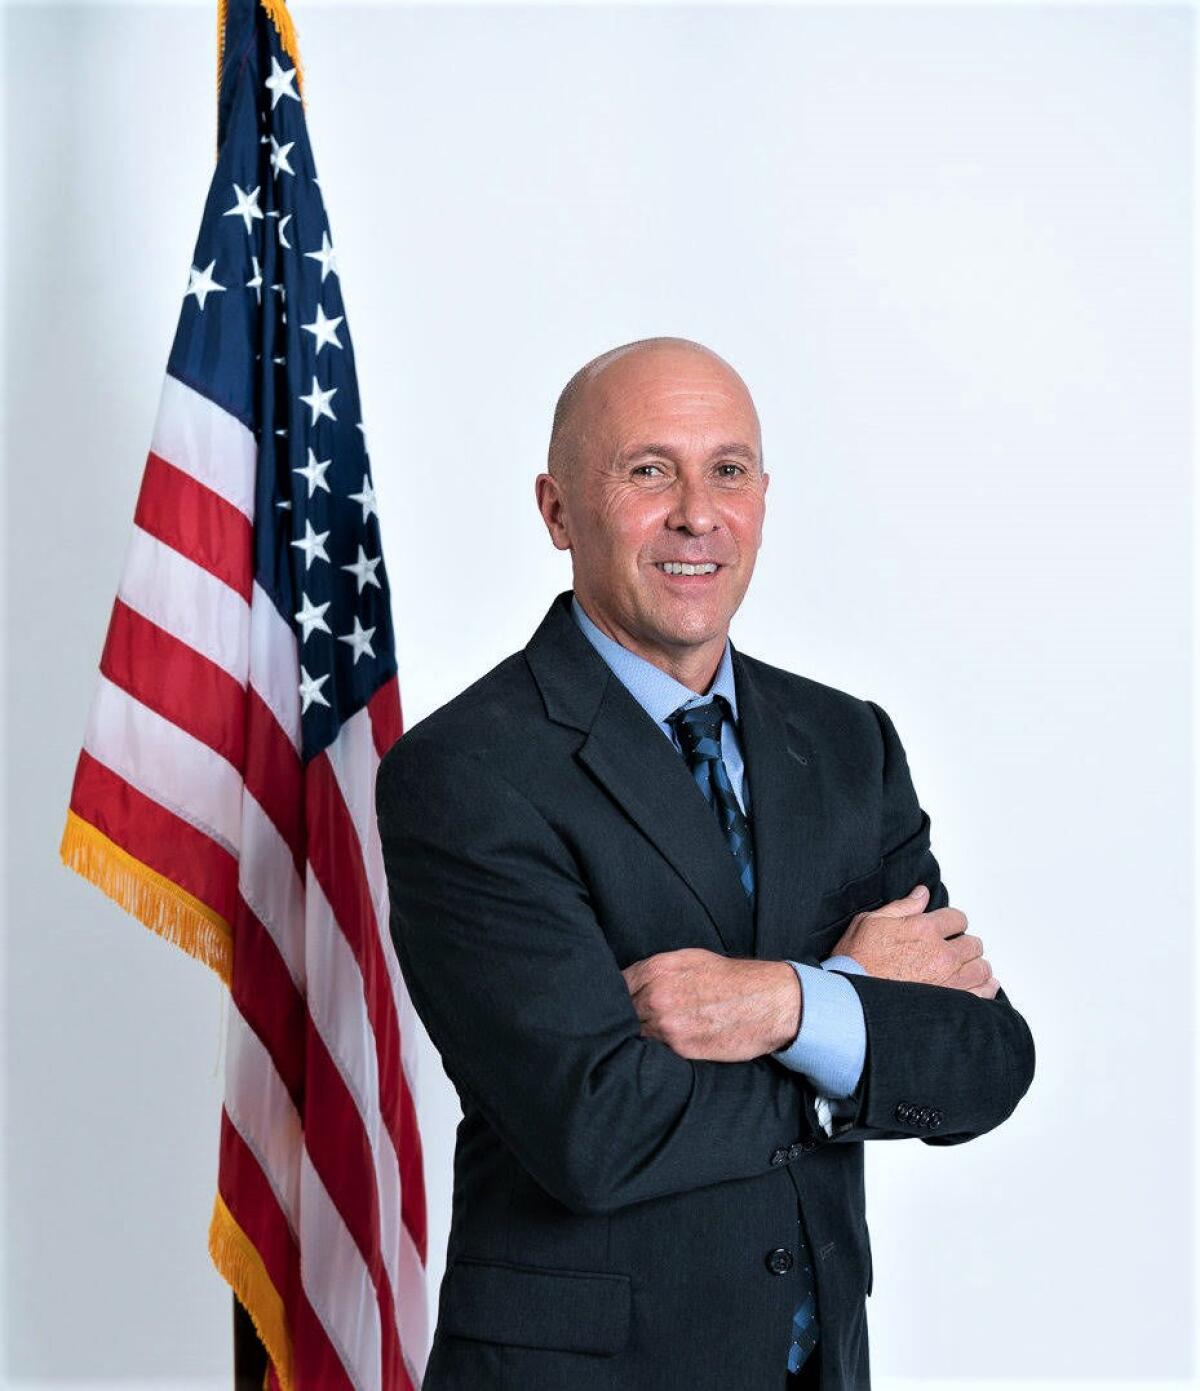 Costa Mesa District 1 City Councilman Don Harper announced Tuesday he would soon resign from office for personal reasons.